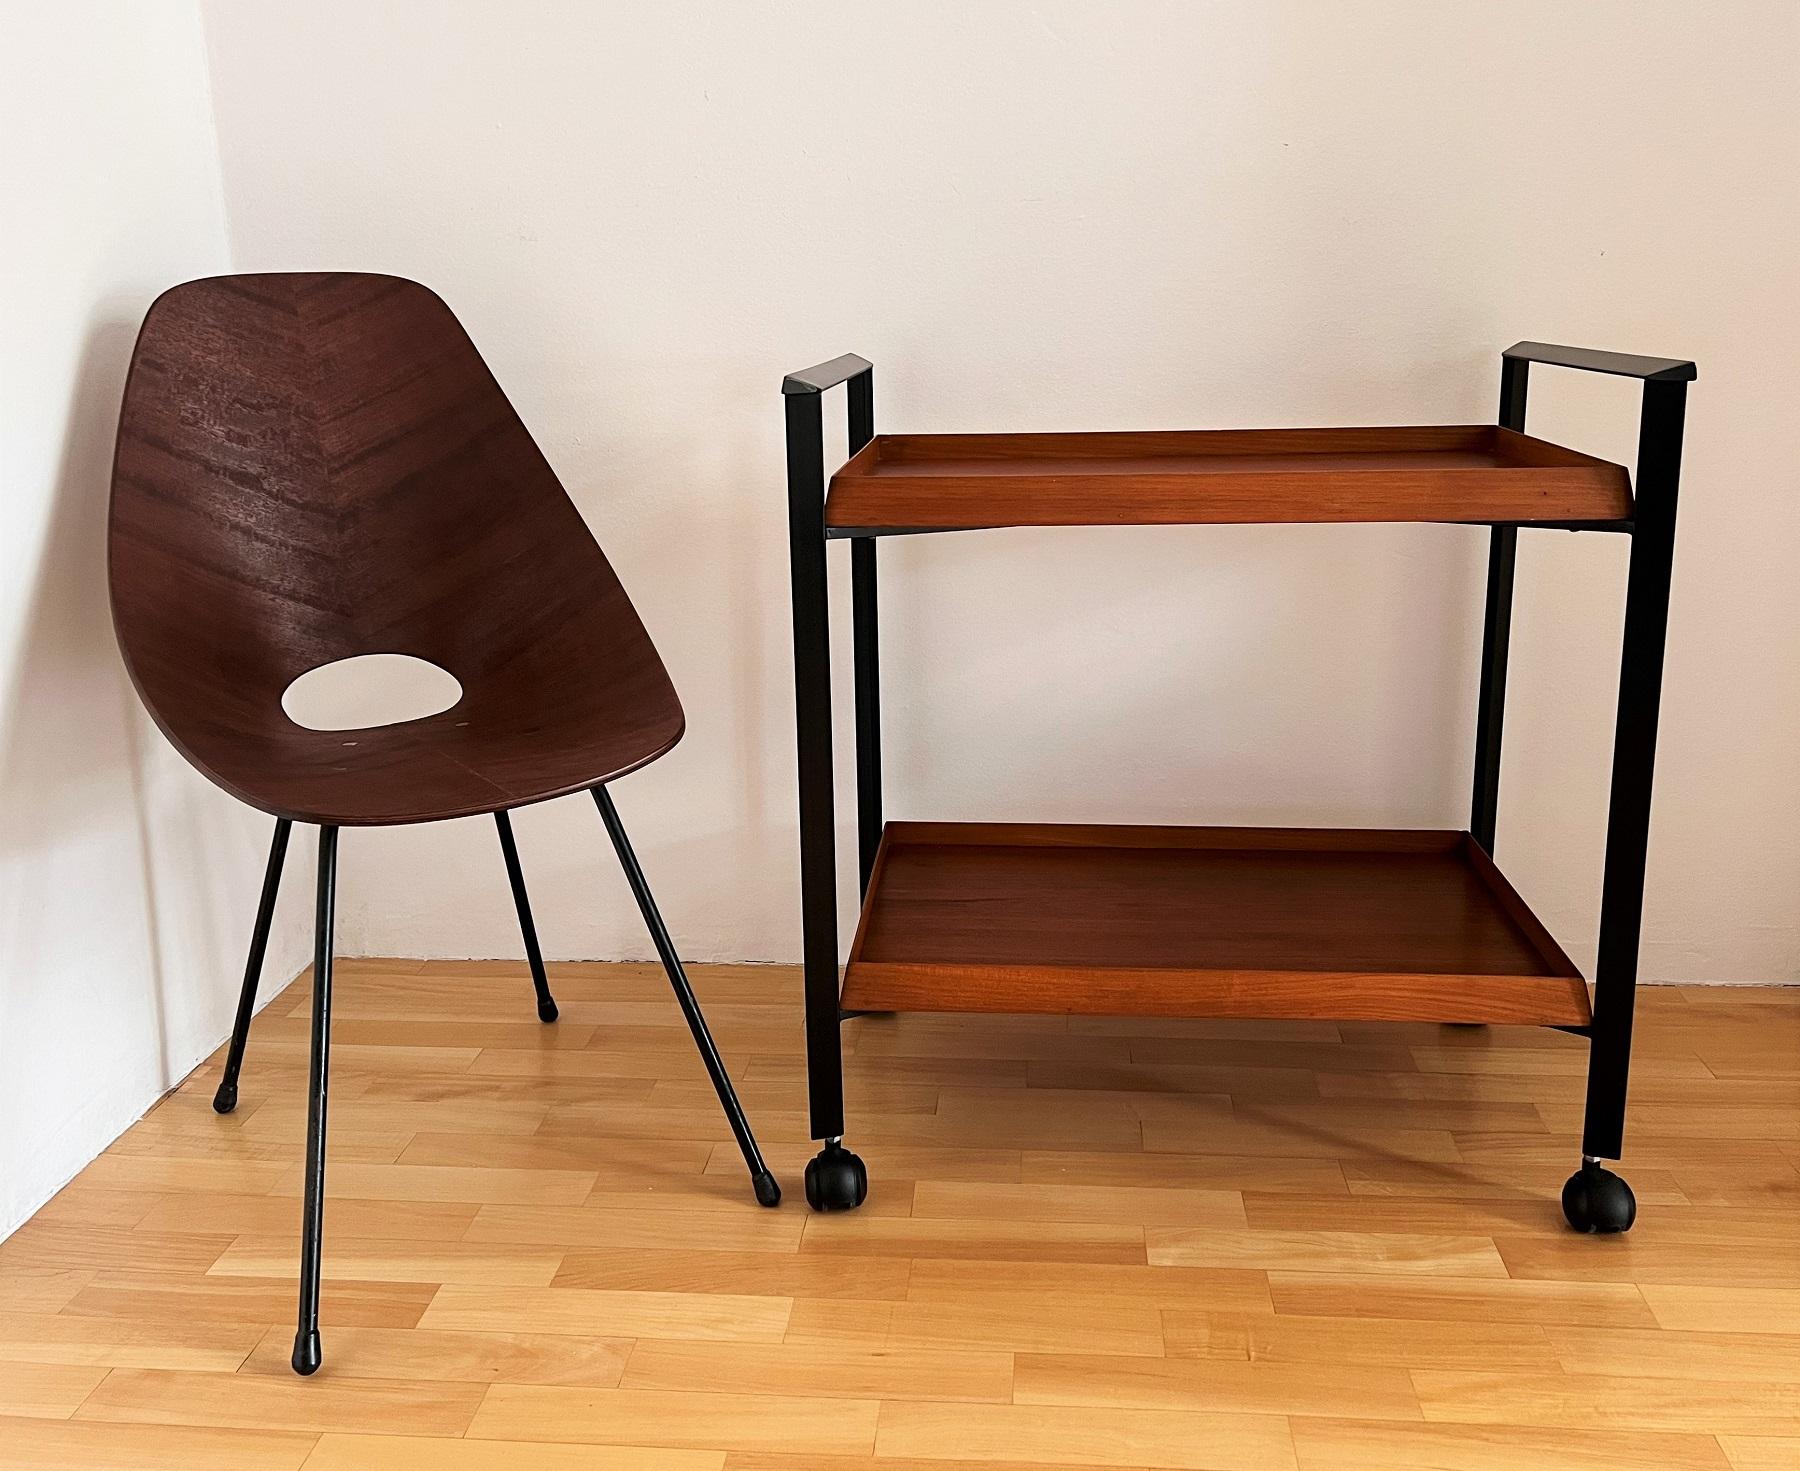 Classic serving cart, bar or trolley from the Italian mid-century, 1970s of great quality.
The base of the trolley is made of black metal with two beautiful teak wood veneer shelves.
The particular shape and beauty of this cart is given by the cut